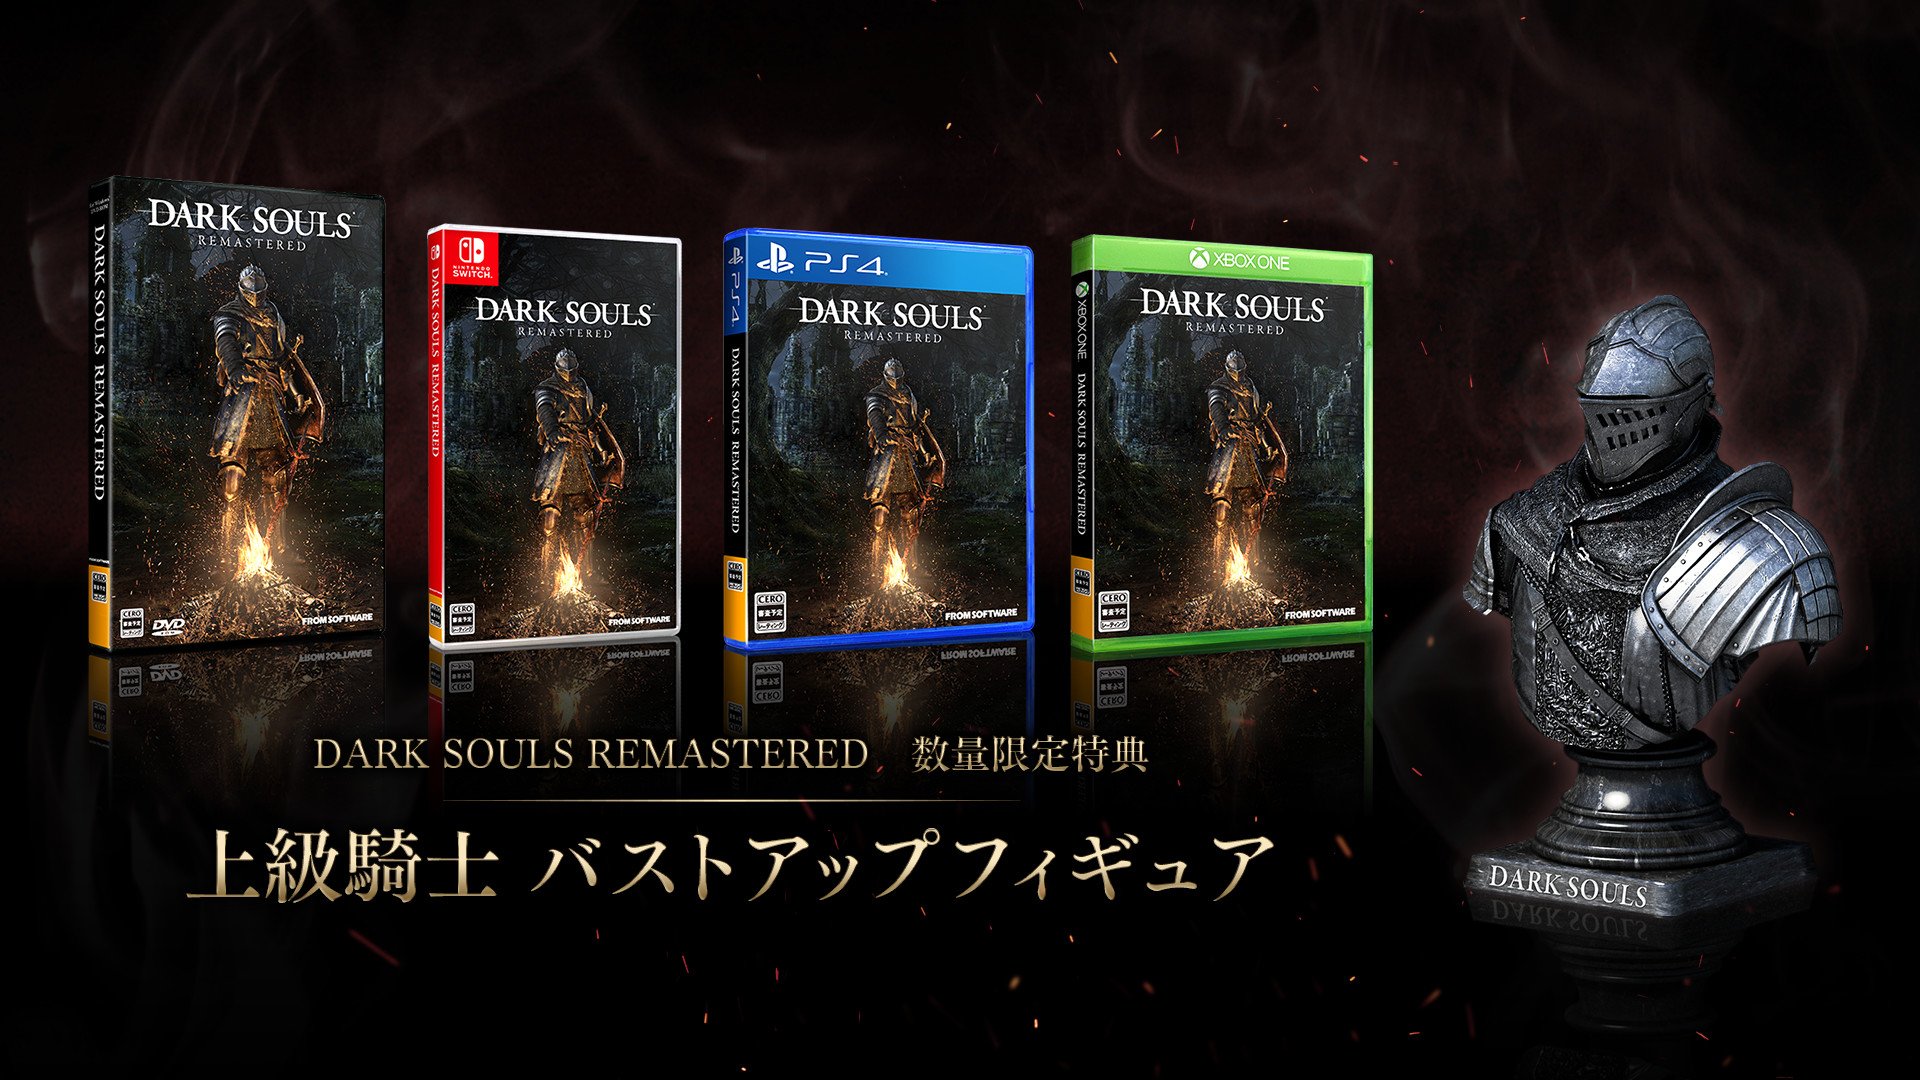 Dark Souls Remastered All The Dark Souls Remastered Box Arts Join The Discussion On Reddit T Co 7gcr2ukyij Join The Group On Steam T Co Bzrcplurii Darksouls Darksoulsremastered Nintendoswitch Xboxone Pc Ps4